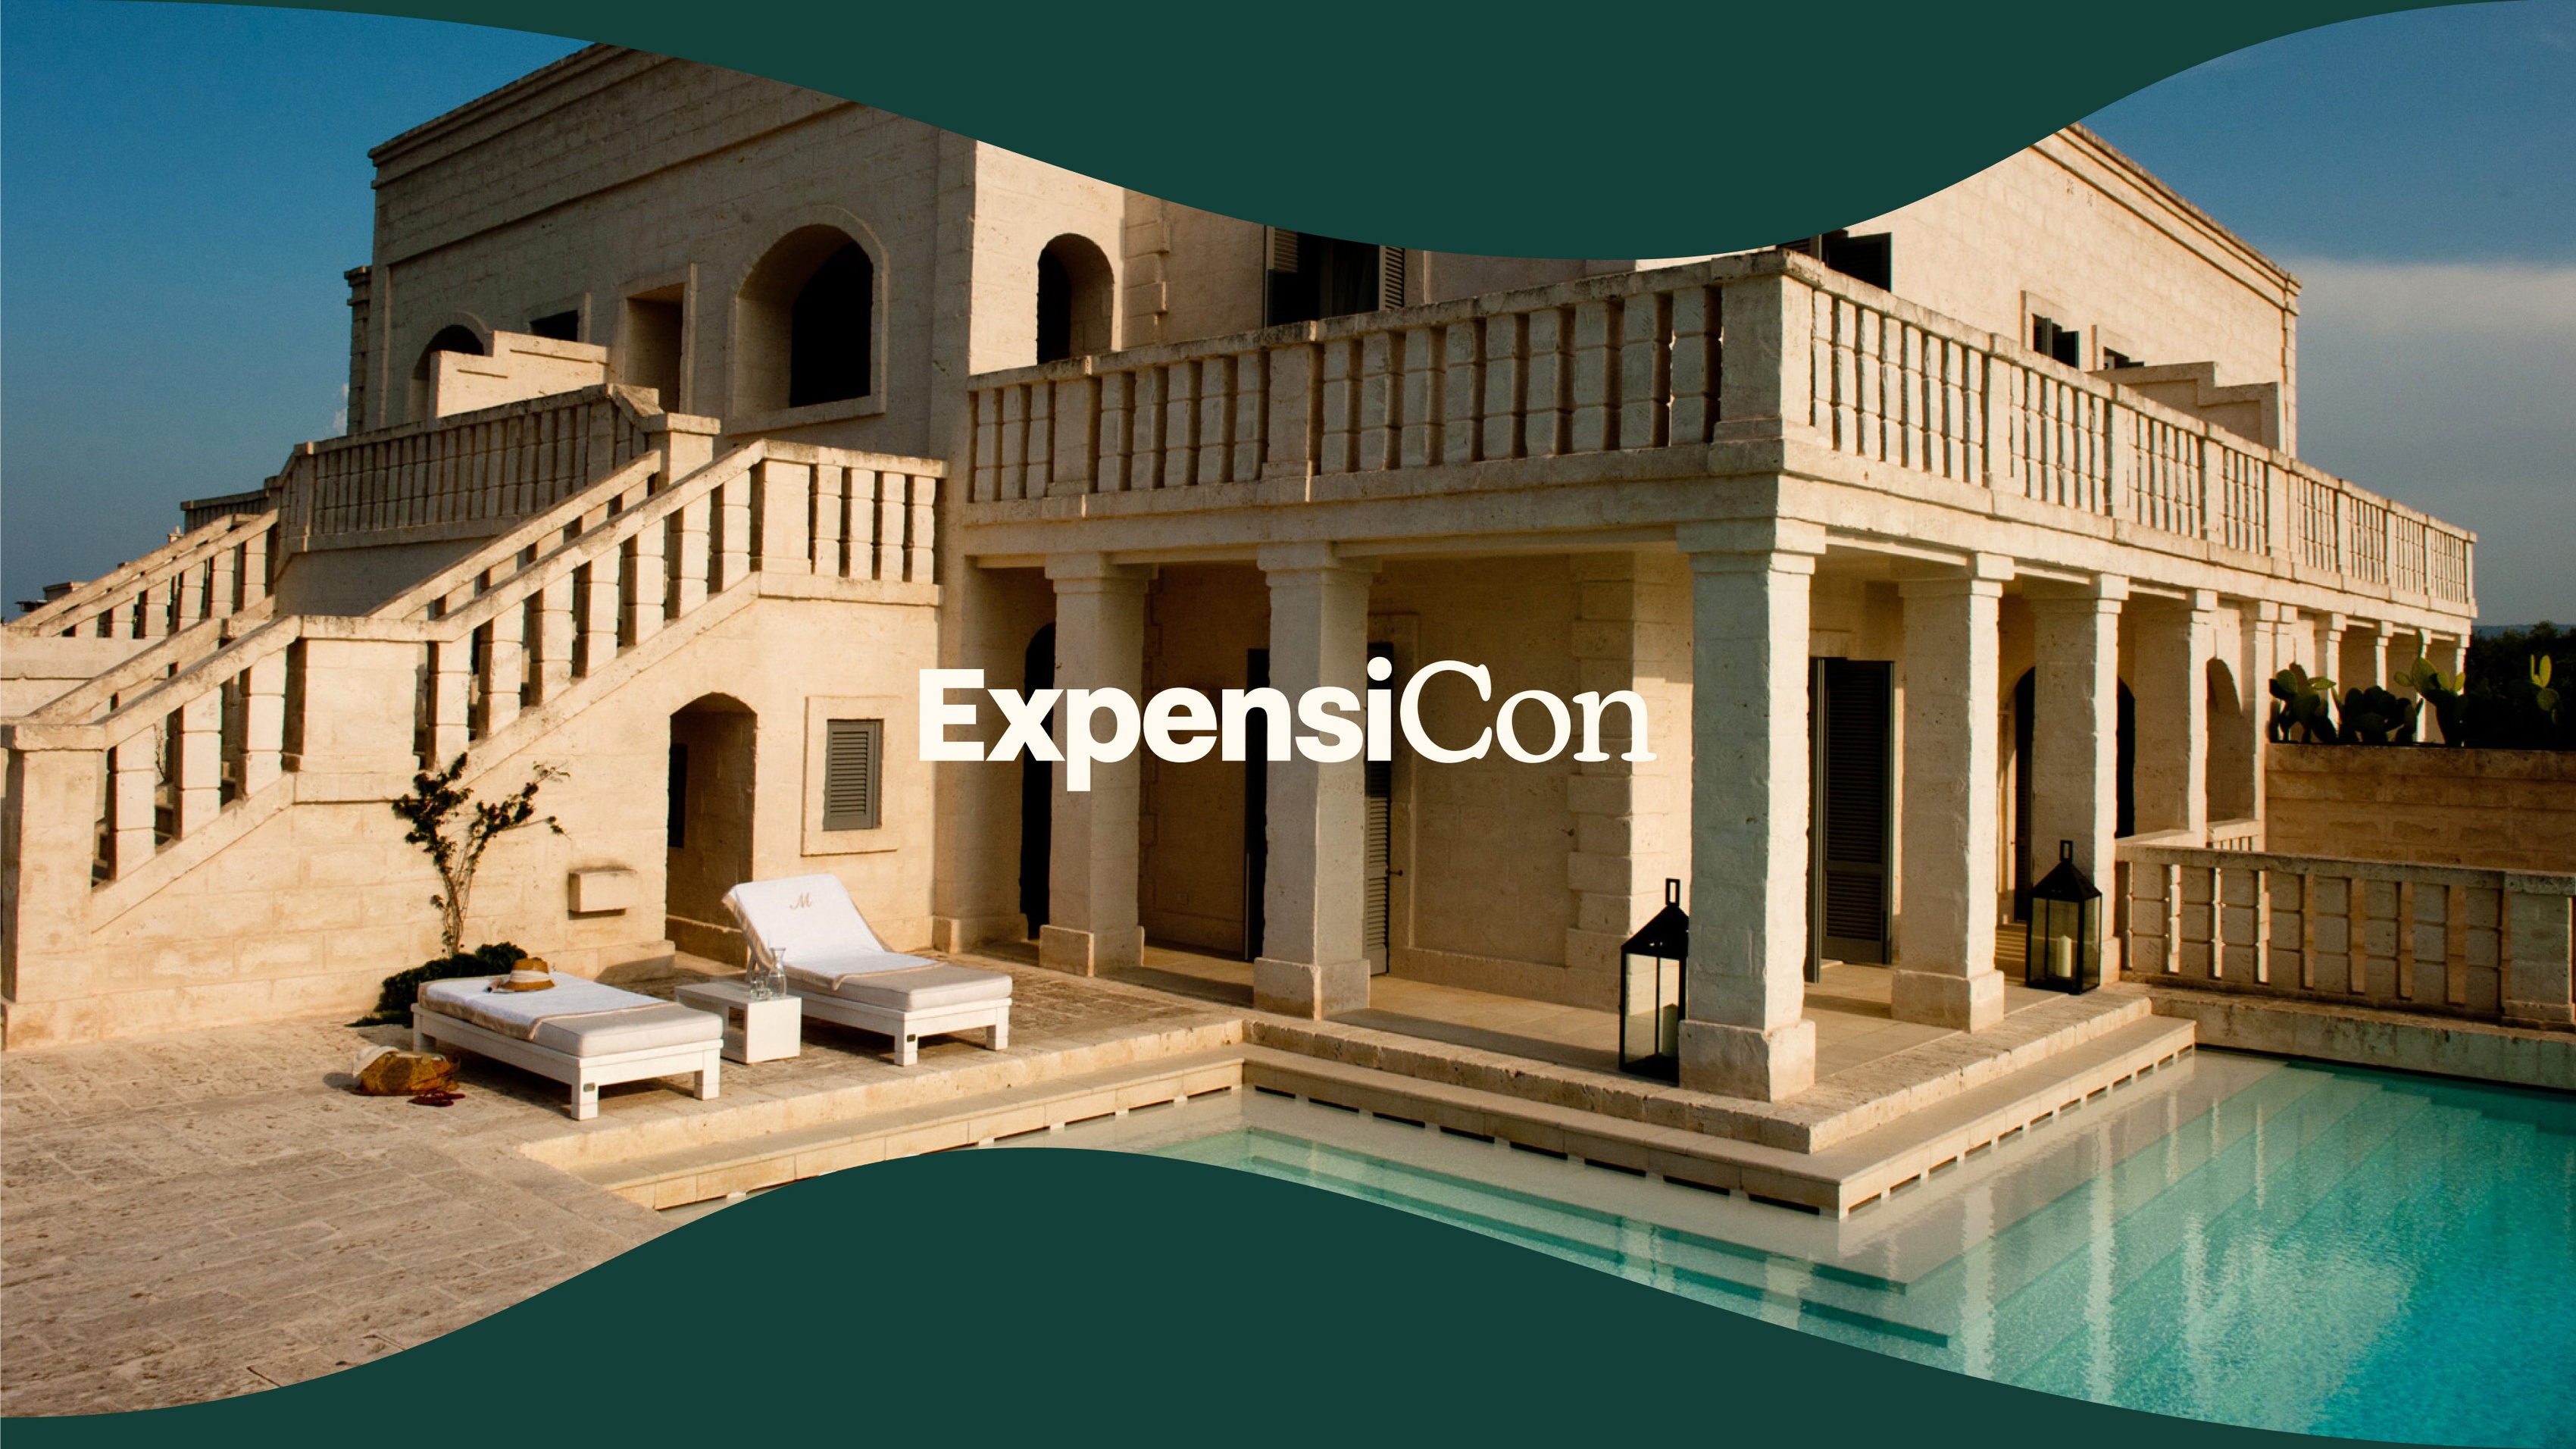 Photo of an italian villa with the Expensicon logo overlaid on top of it